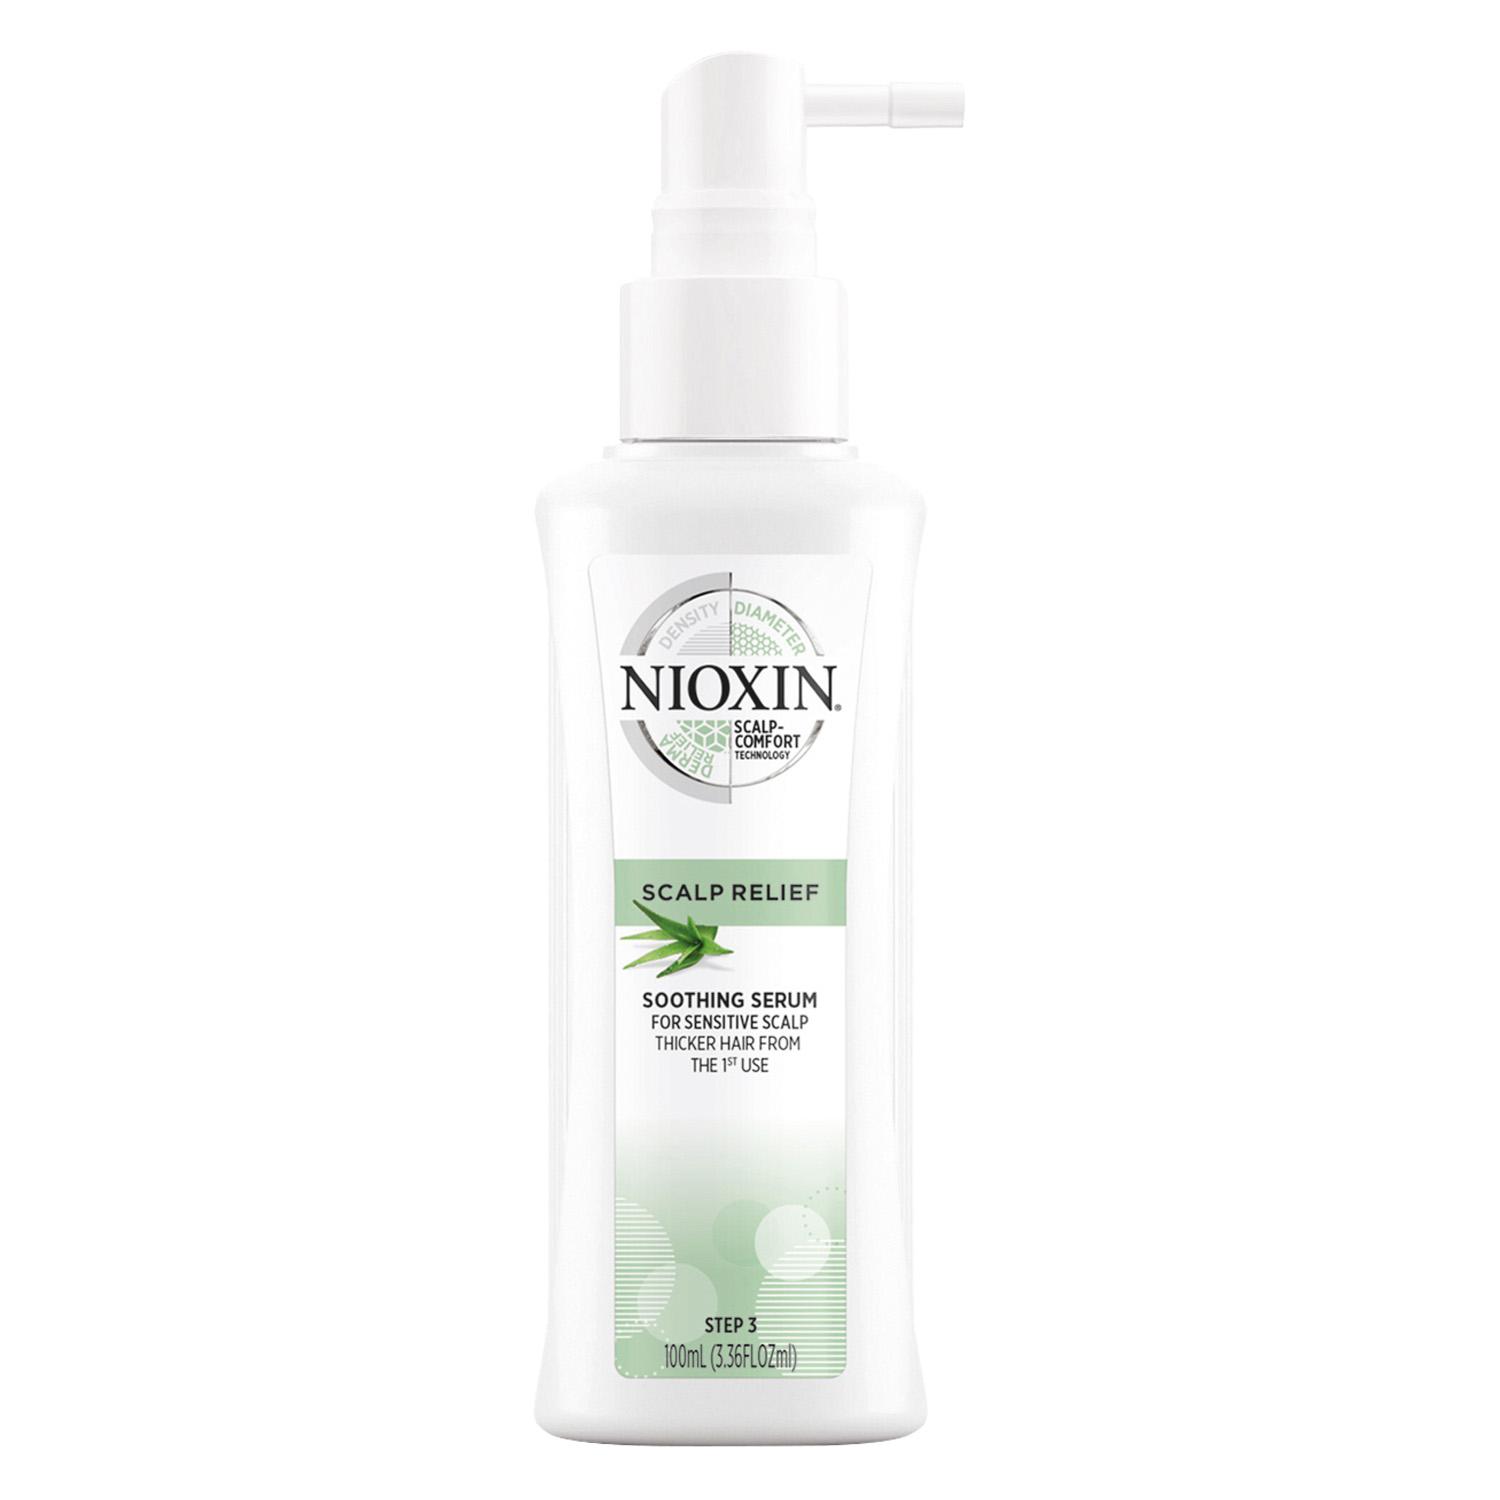 Nioxin - Scalp Relief Soothing Serum